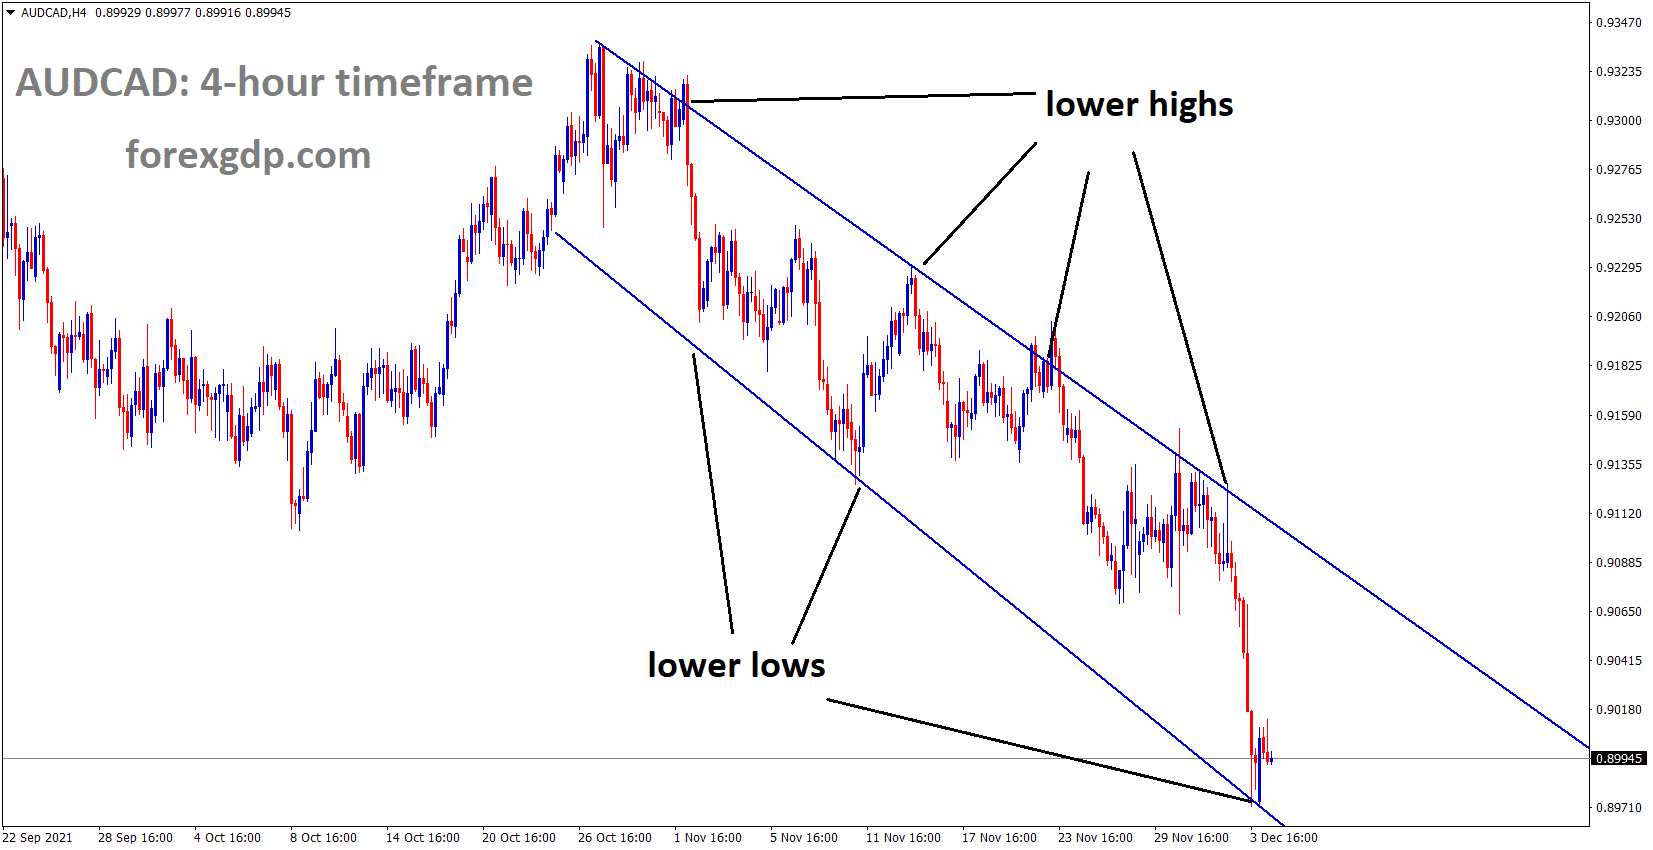 AUDCAD is moving in the Descending channel and market rebounding from the lower low area of the channel